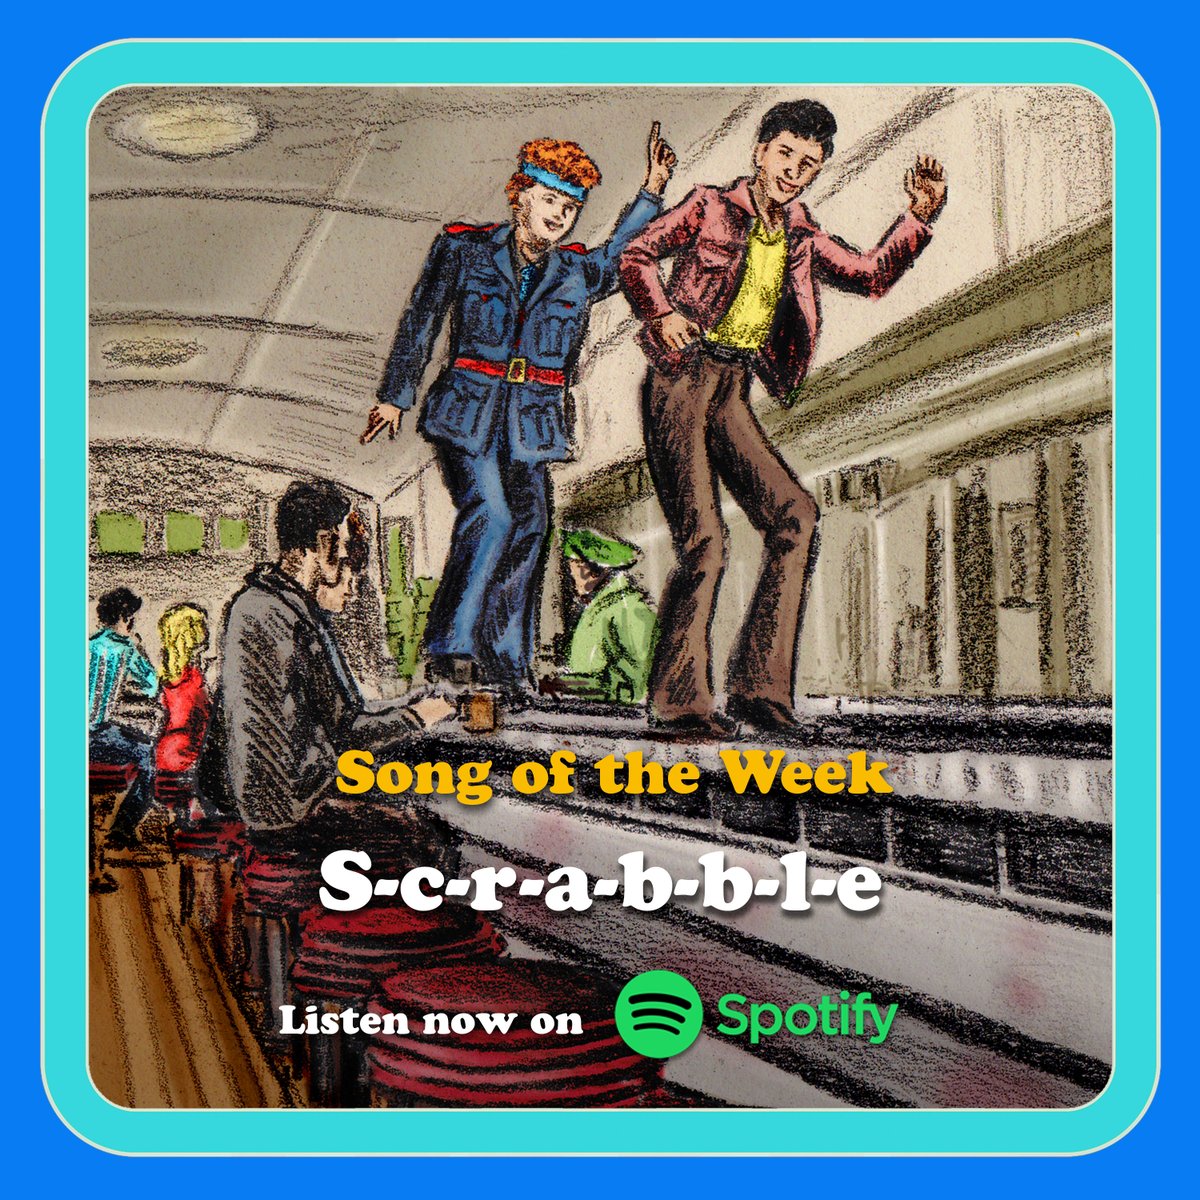 Kickstart the weekend with 'S-C-R-A-BBLE'!  our Song of the Week tinyurl.com/52vejthp featuring Nathan Amzi and Chad Burris.  Catch the full series on Spotify, Apple Podcasts, Audible #podcastmusical  #newmusical #scrabble #newpodcast #musicalpodcast #broadwaypodcast